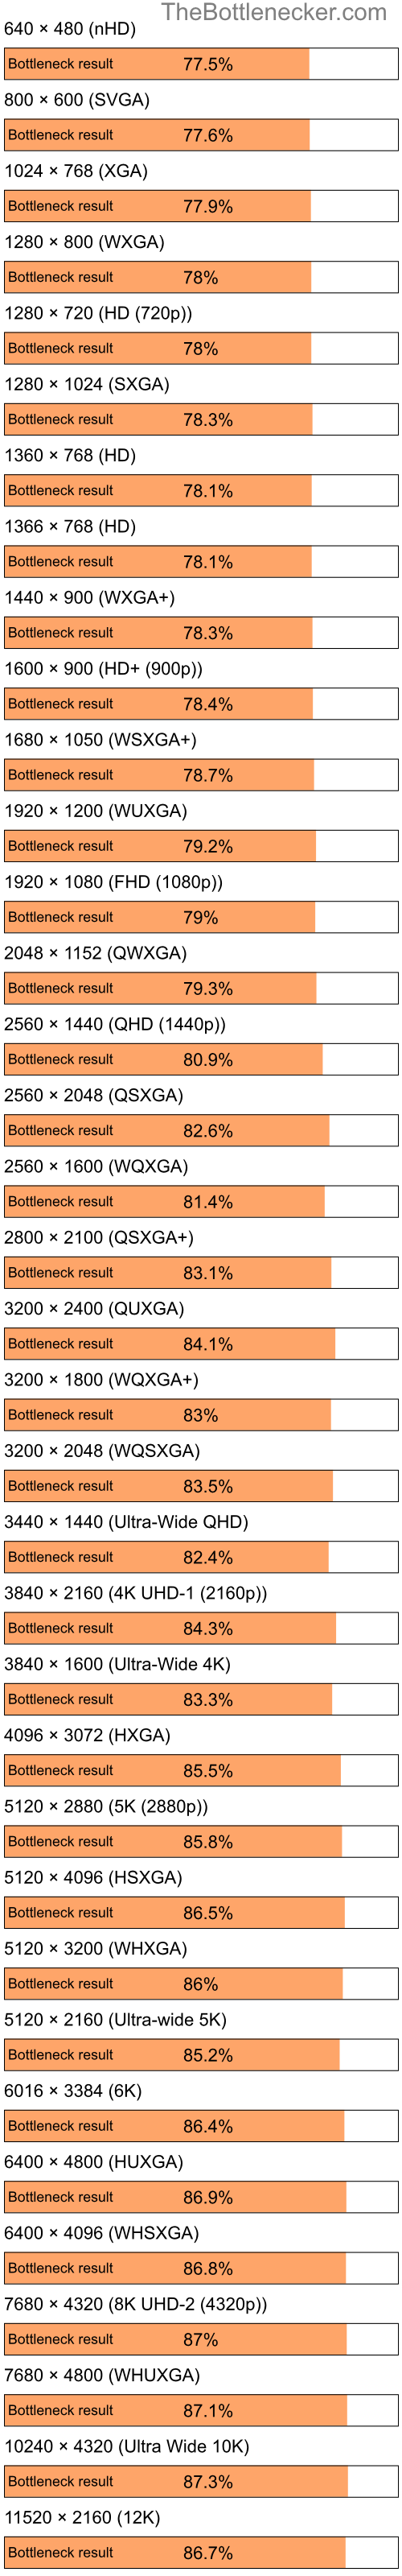 Bottleneck results by resolution for Intel Atom Z520 and NVIDIA nForce 620i in7 Days to Die